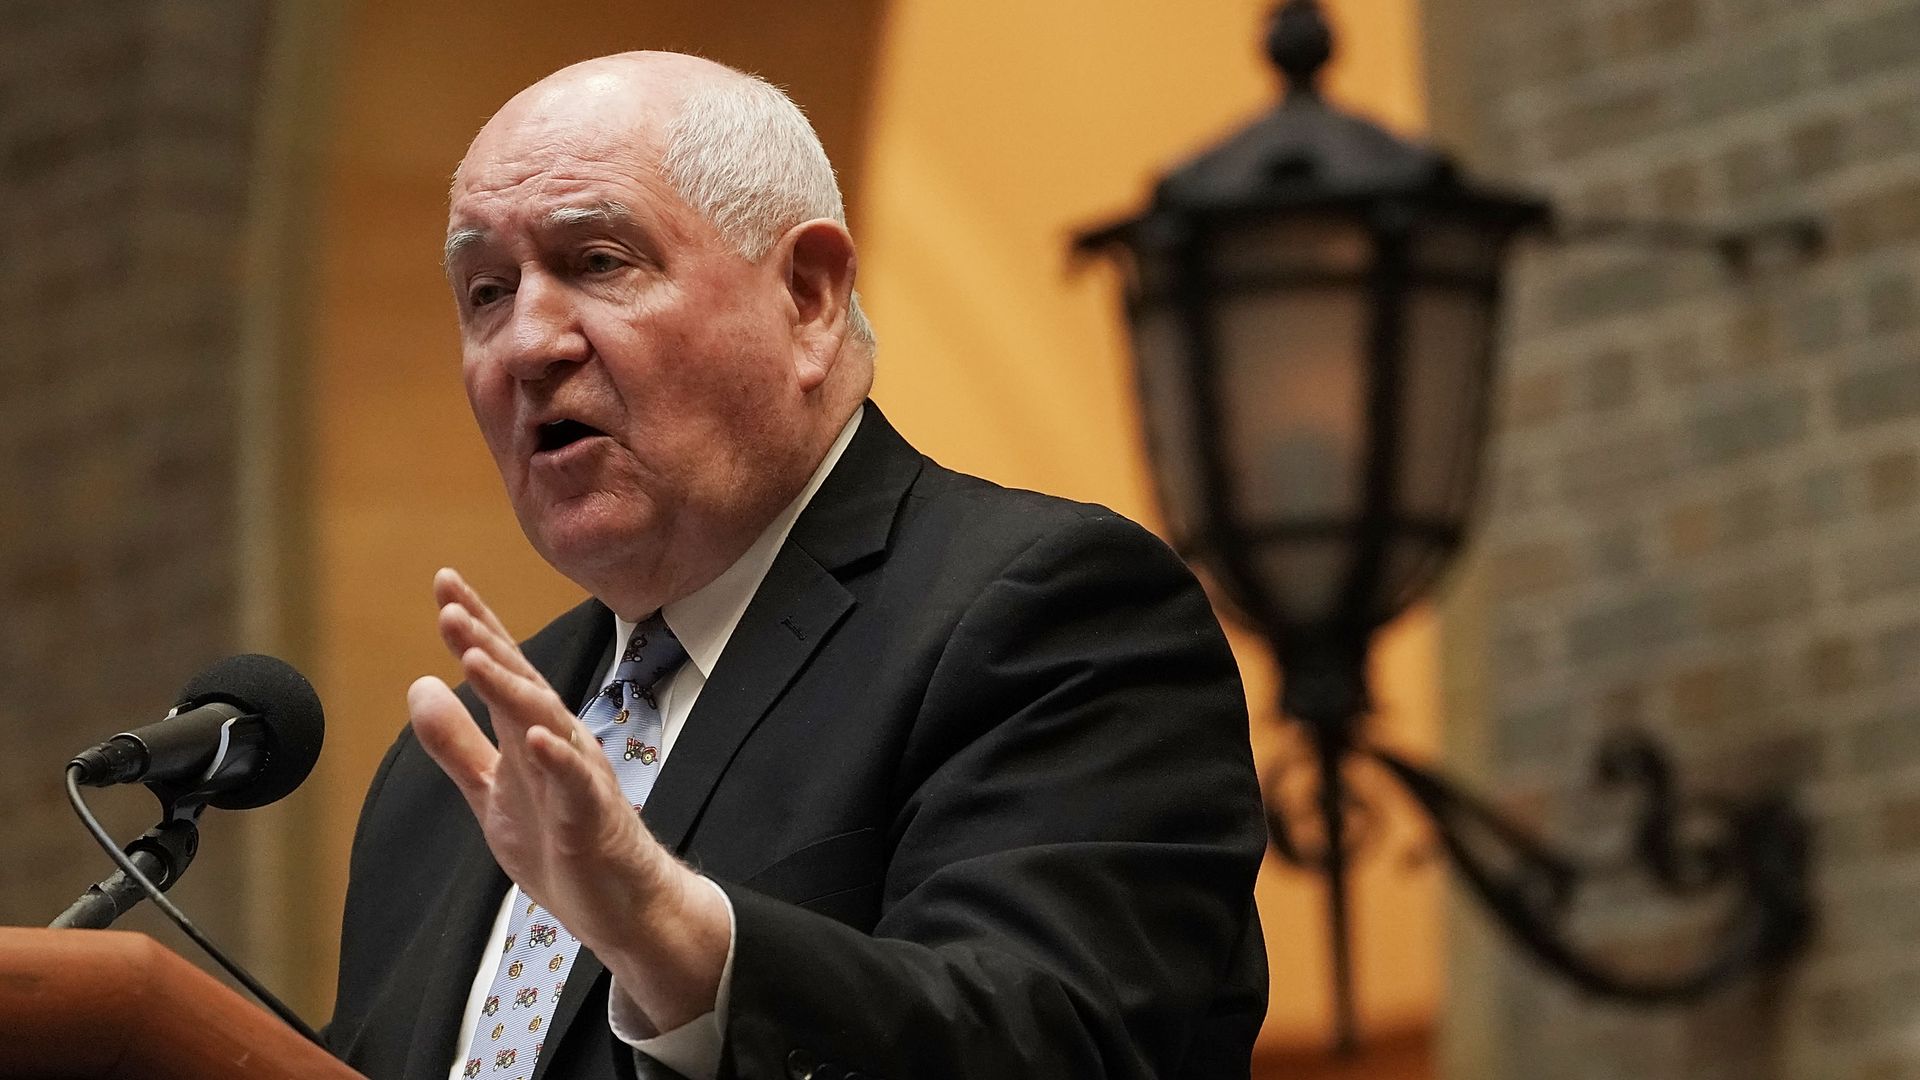 Secretary of Agriculture Sonny Perdue. Photo: Alex Wong/Getty Images